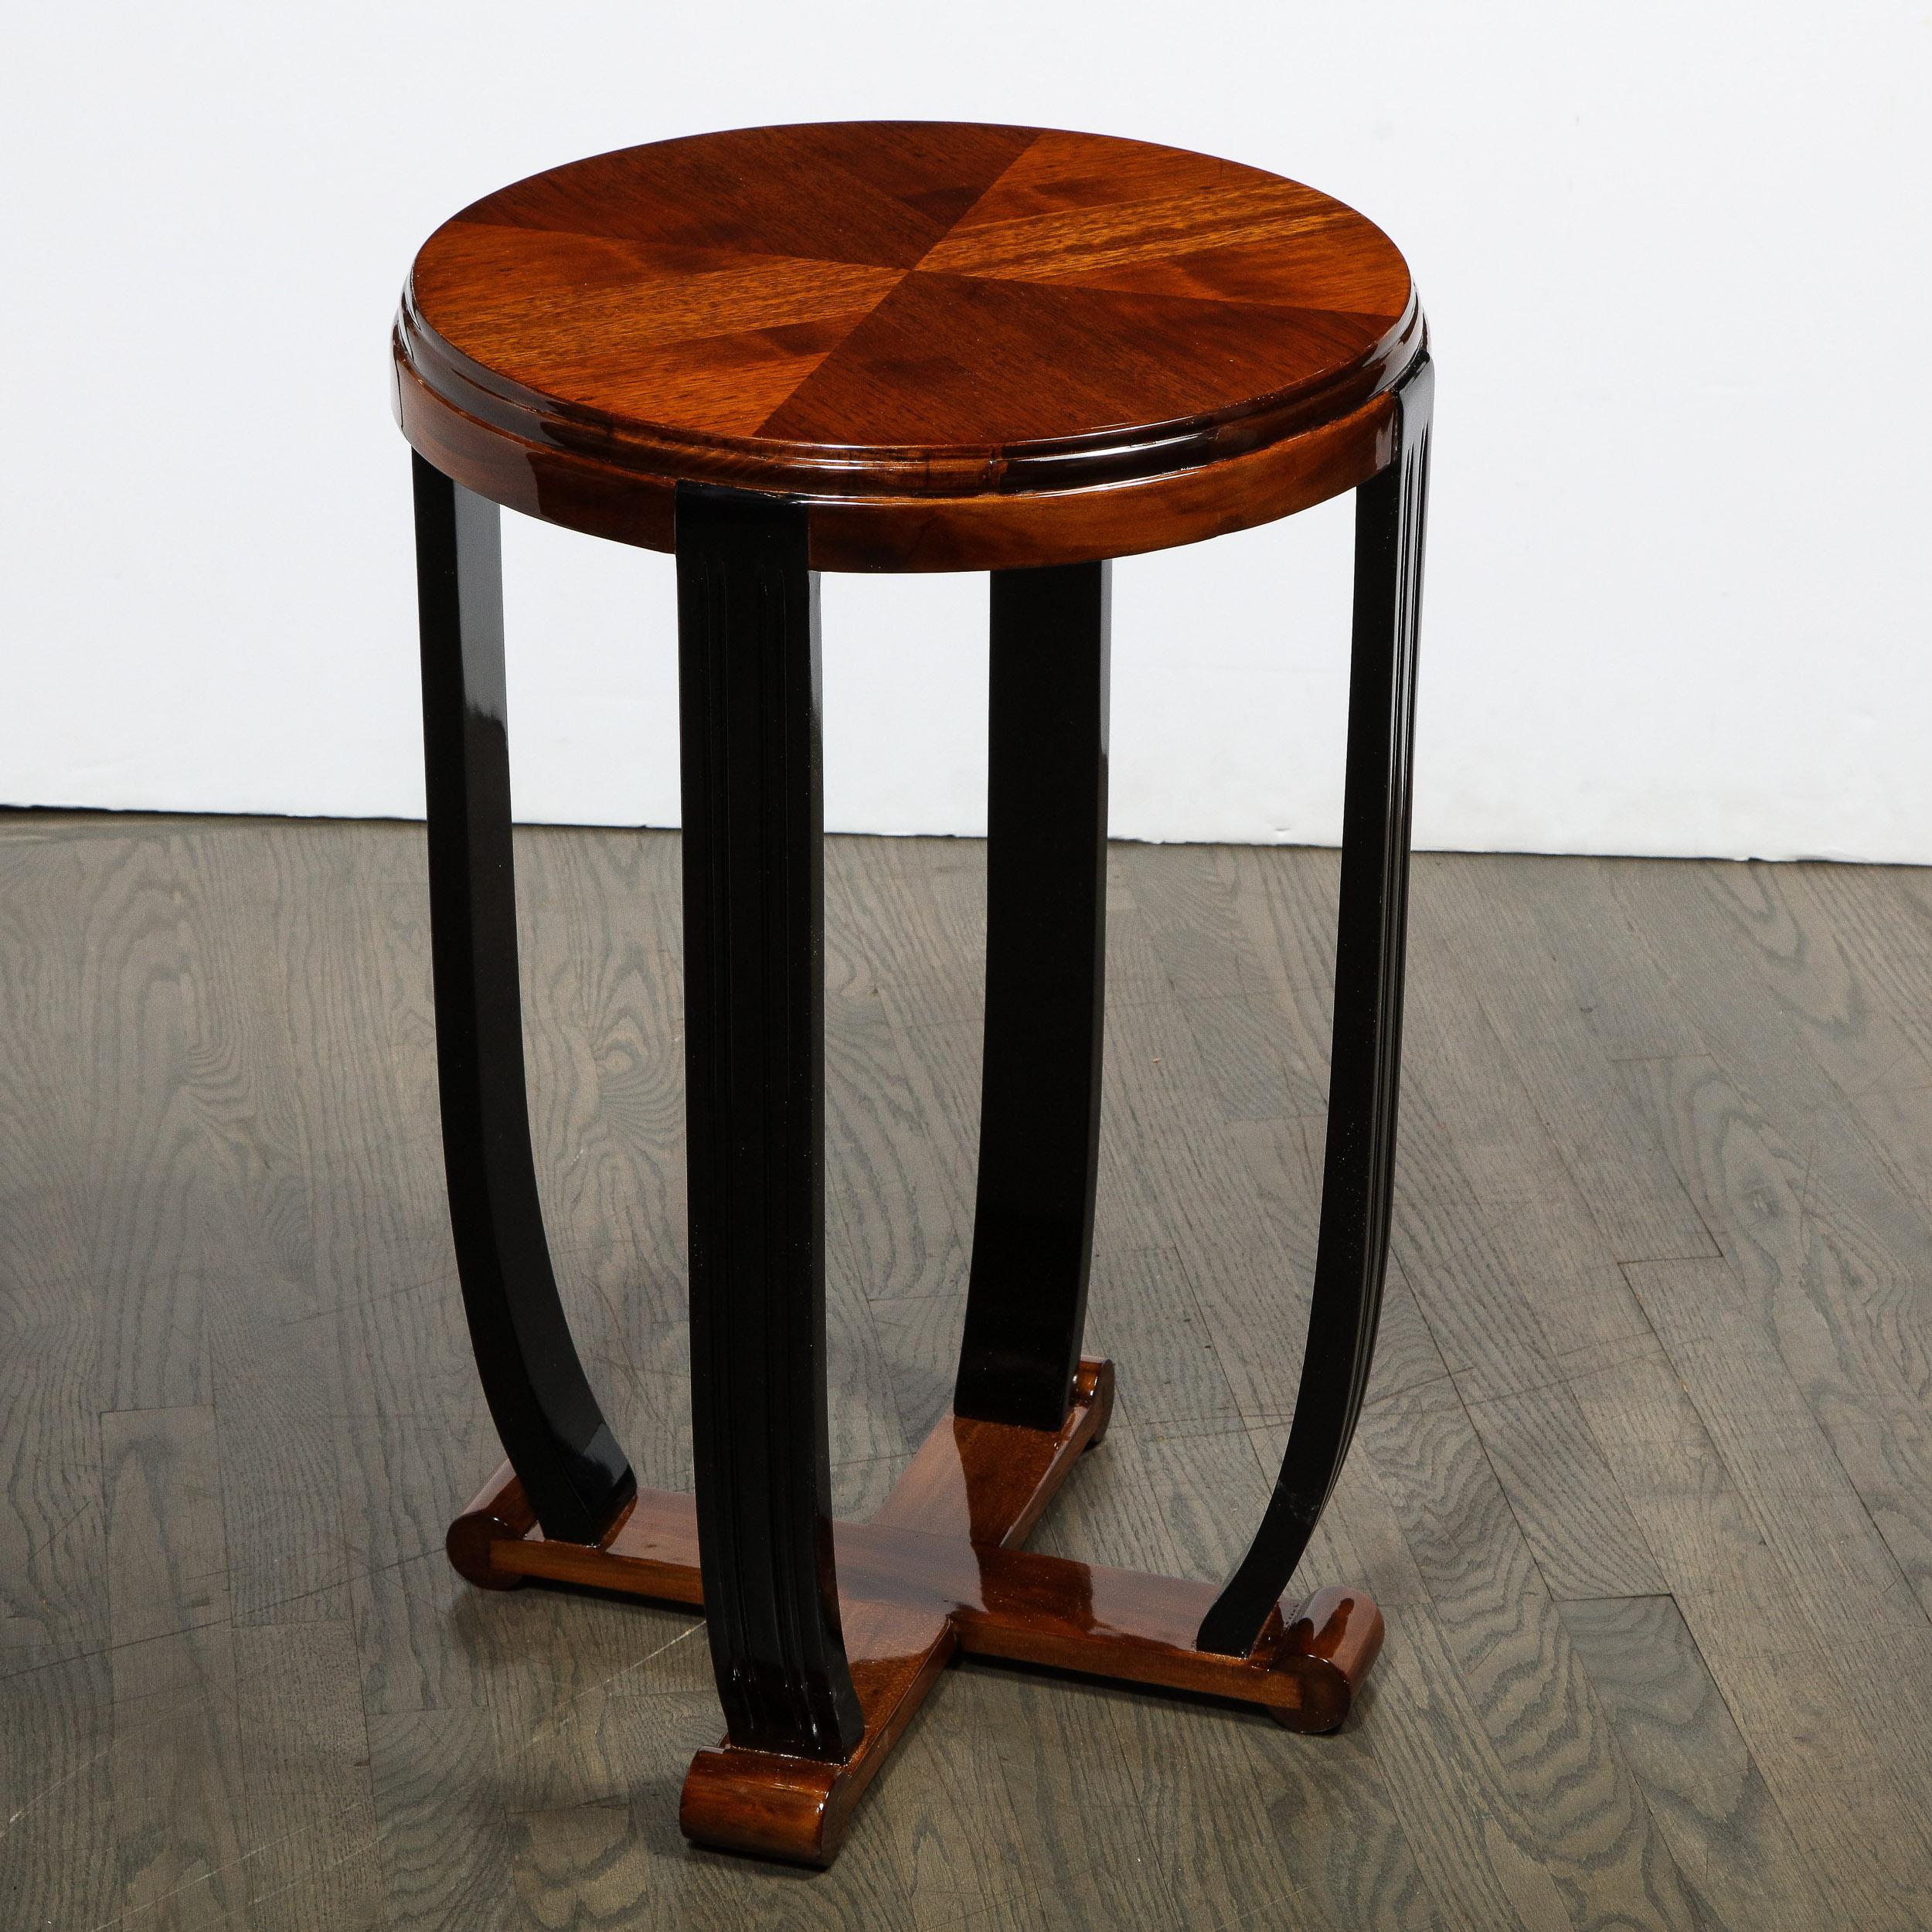 Mid-20th Century Art Deco Streamlined Gueridon Table in Black Lacquer and Bookmatched Walnut